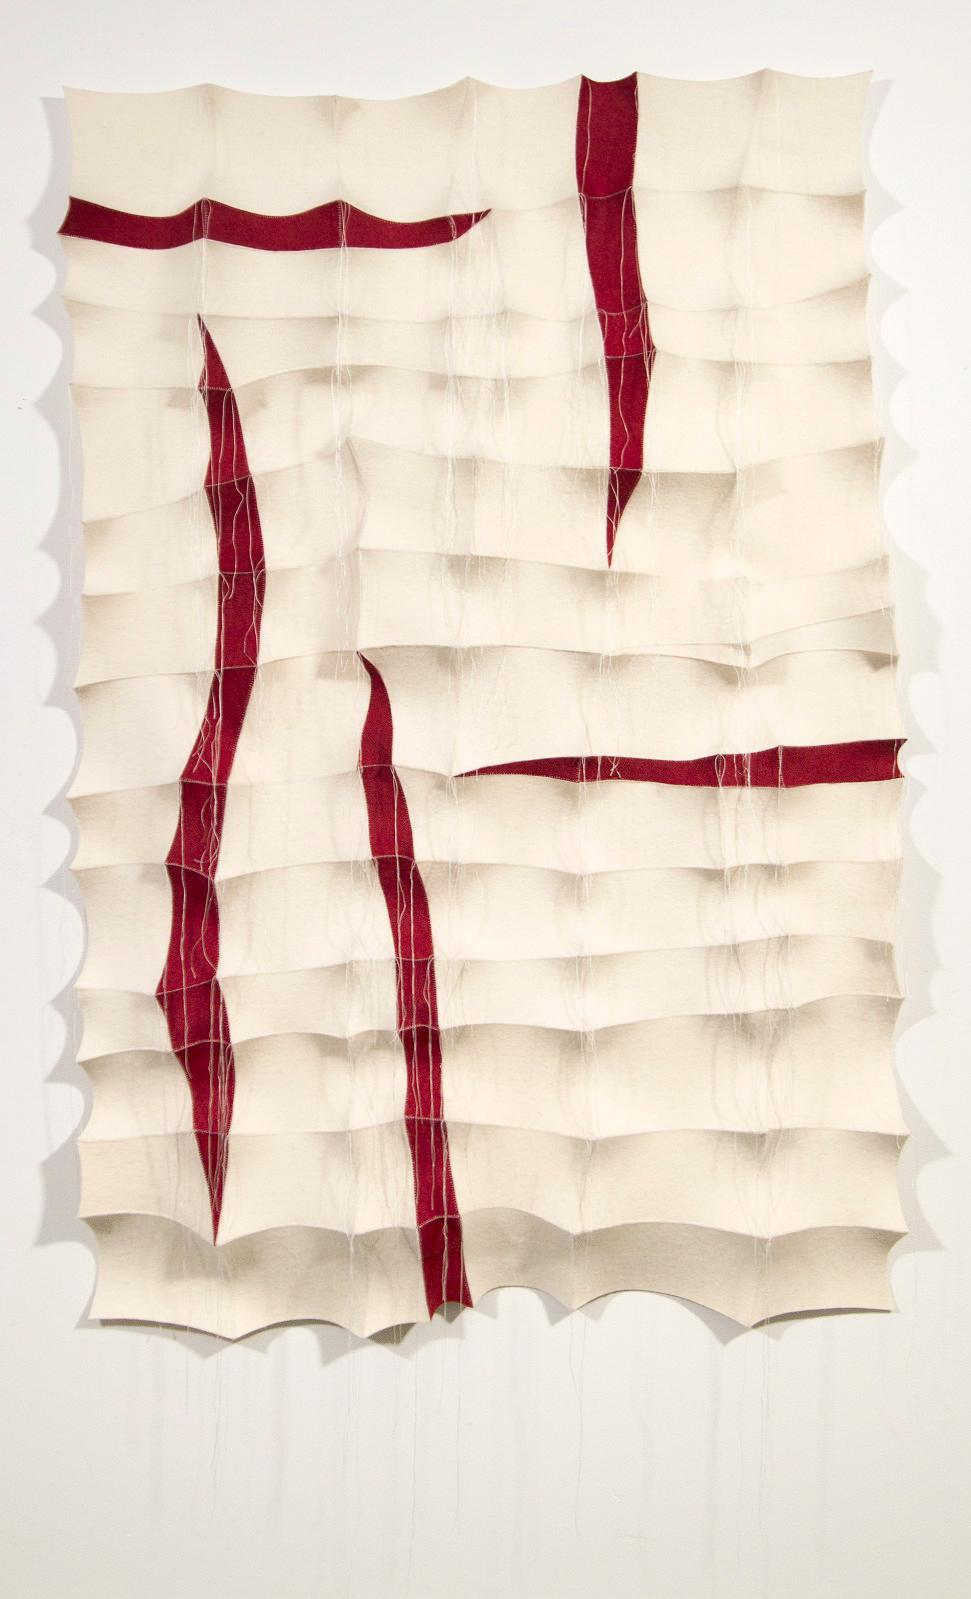 Chung-Im Kim Abstract Sculpture - Tumsae 7 - red, white, pattern, wall hanging, 3D, felt, textile, tapestry